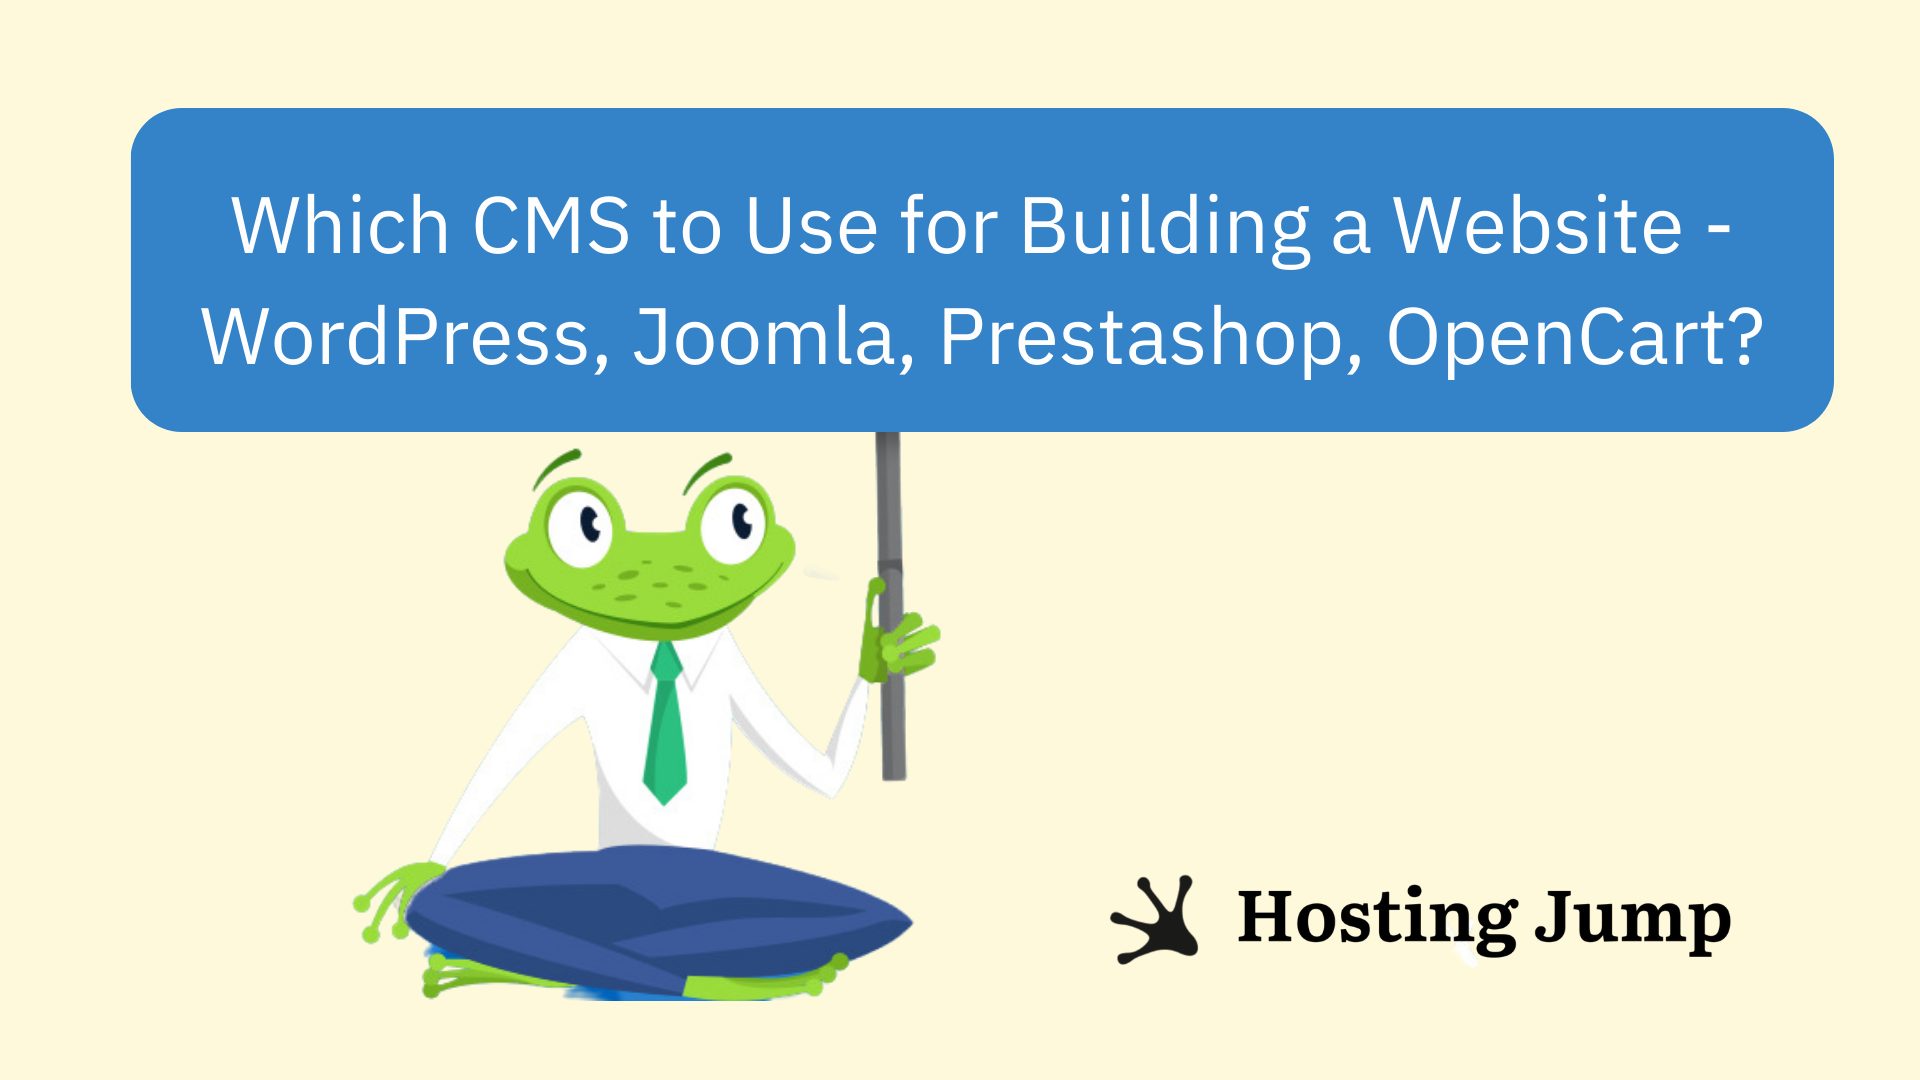 Which CMS to Use for Building a Website - WordPress, Joomla, Prestashop, OpenCart?